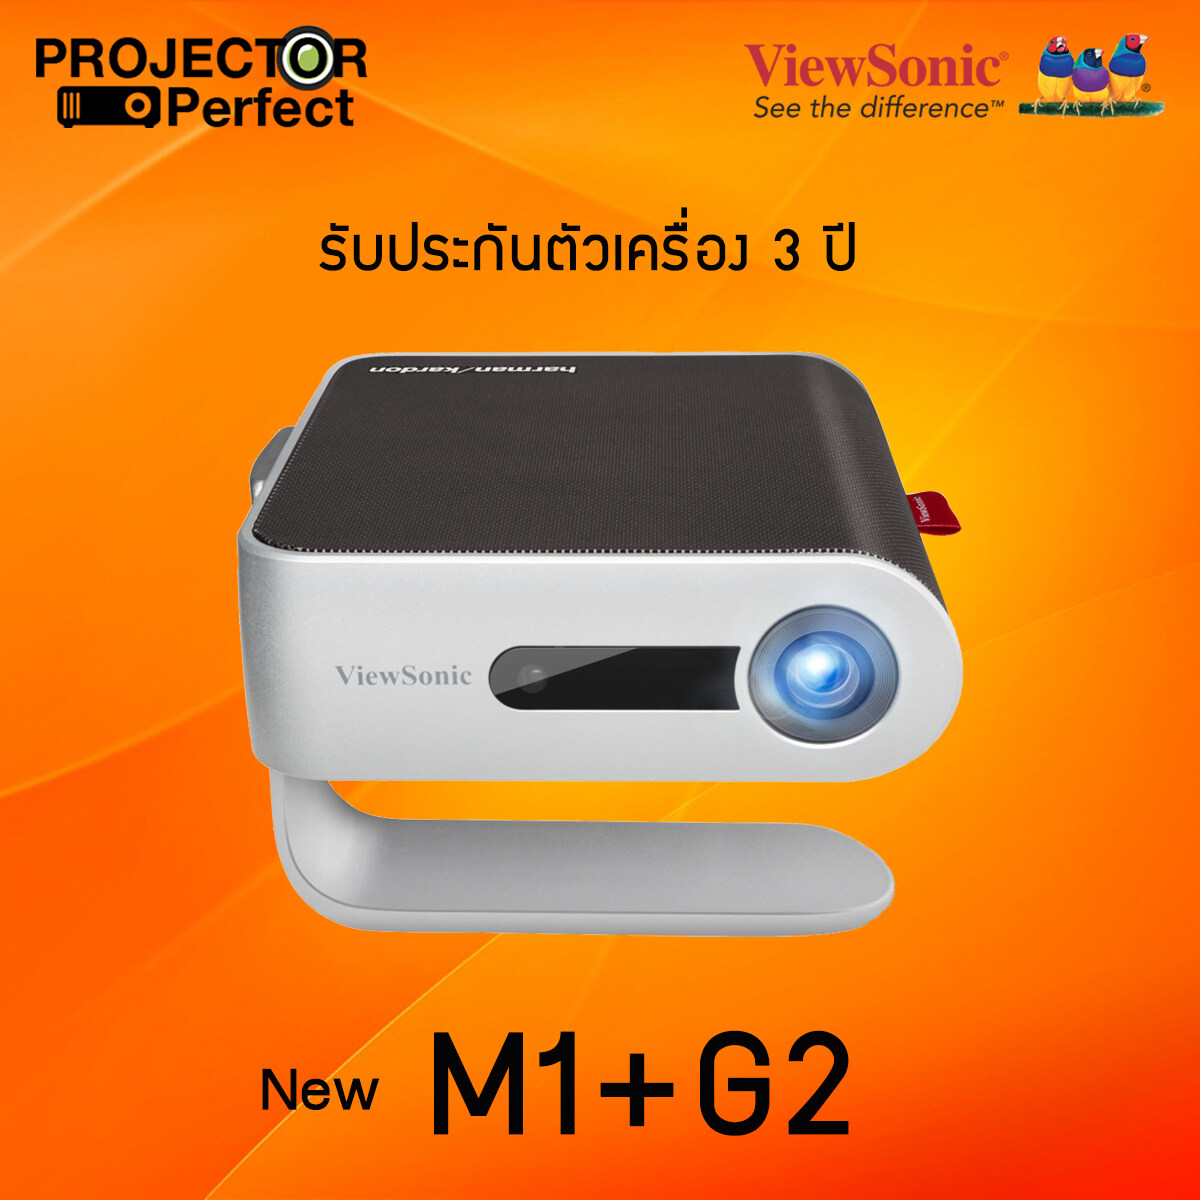 New! ViewSonic M1+ G2 WVGA Ultra-Portable 300 LED Lumens Projector with WiFi Bluetooth and Dual Harman Kardon Speakers , 3 Years Warranty - Projector Perfect M1+_G2